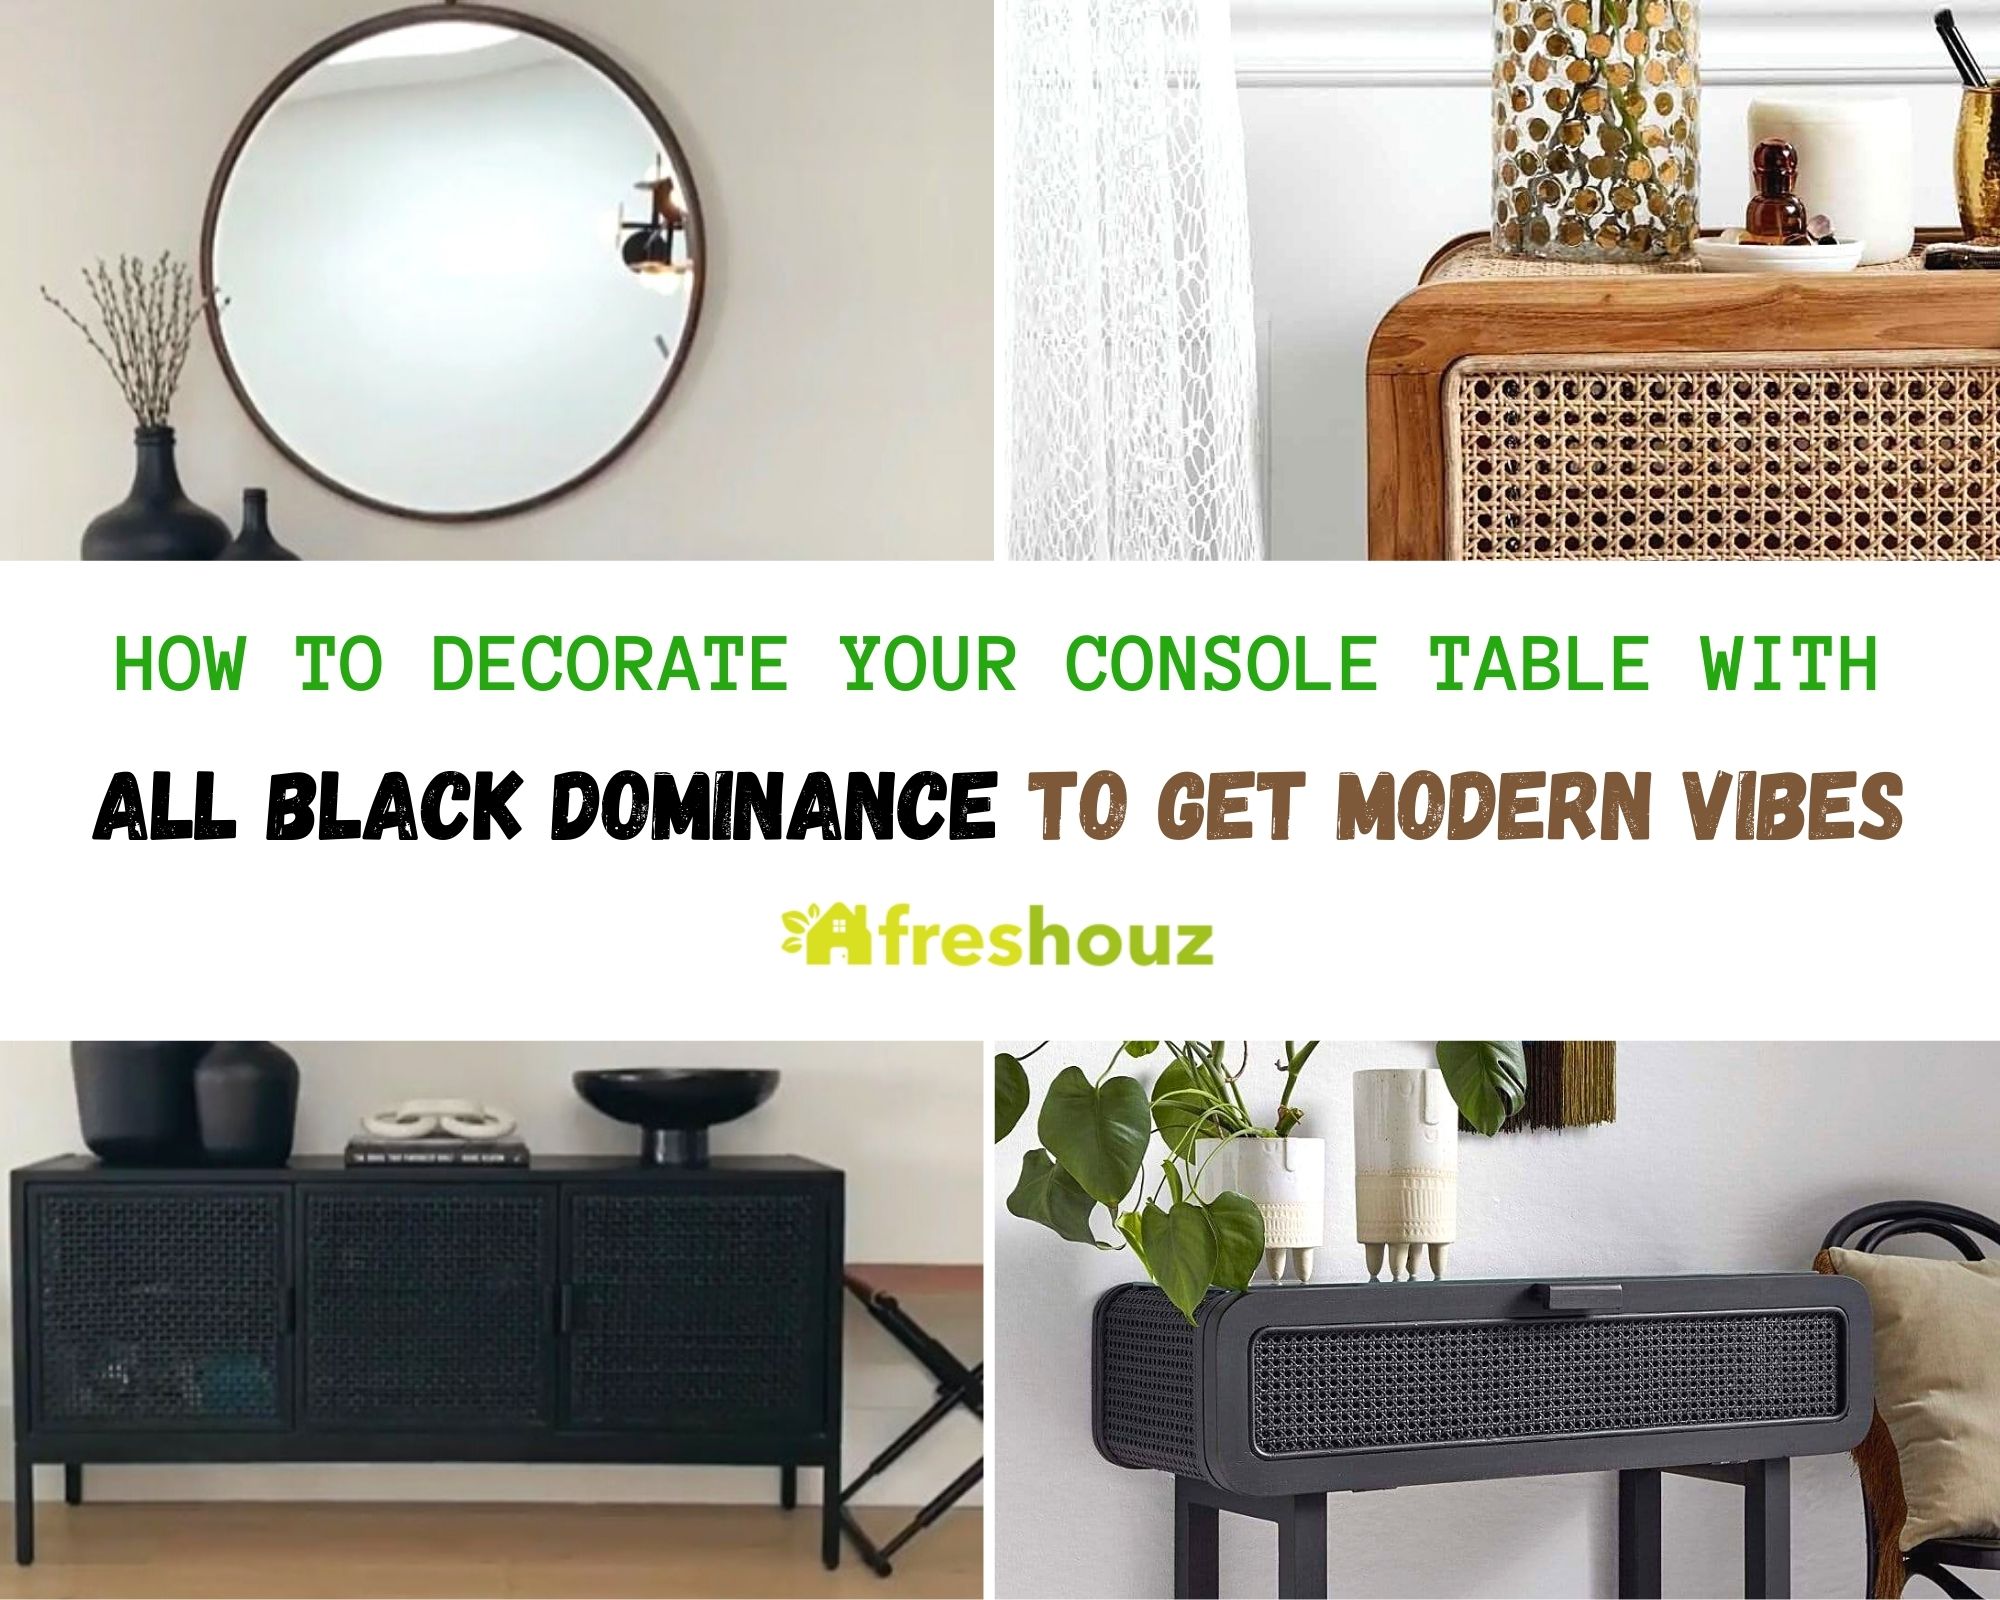 How To Decorate Your Console Table With Black Dominance To Get Modern Vibes